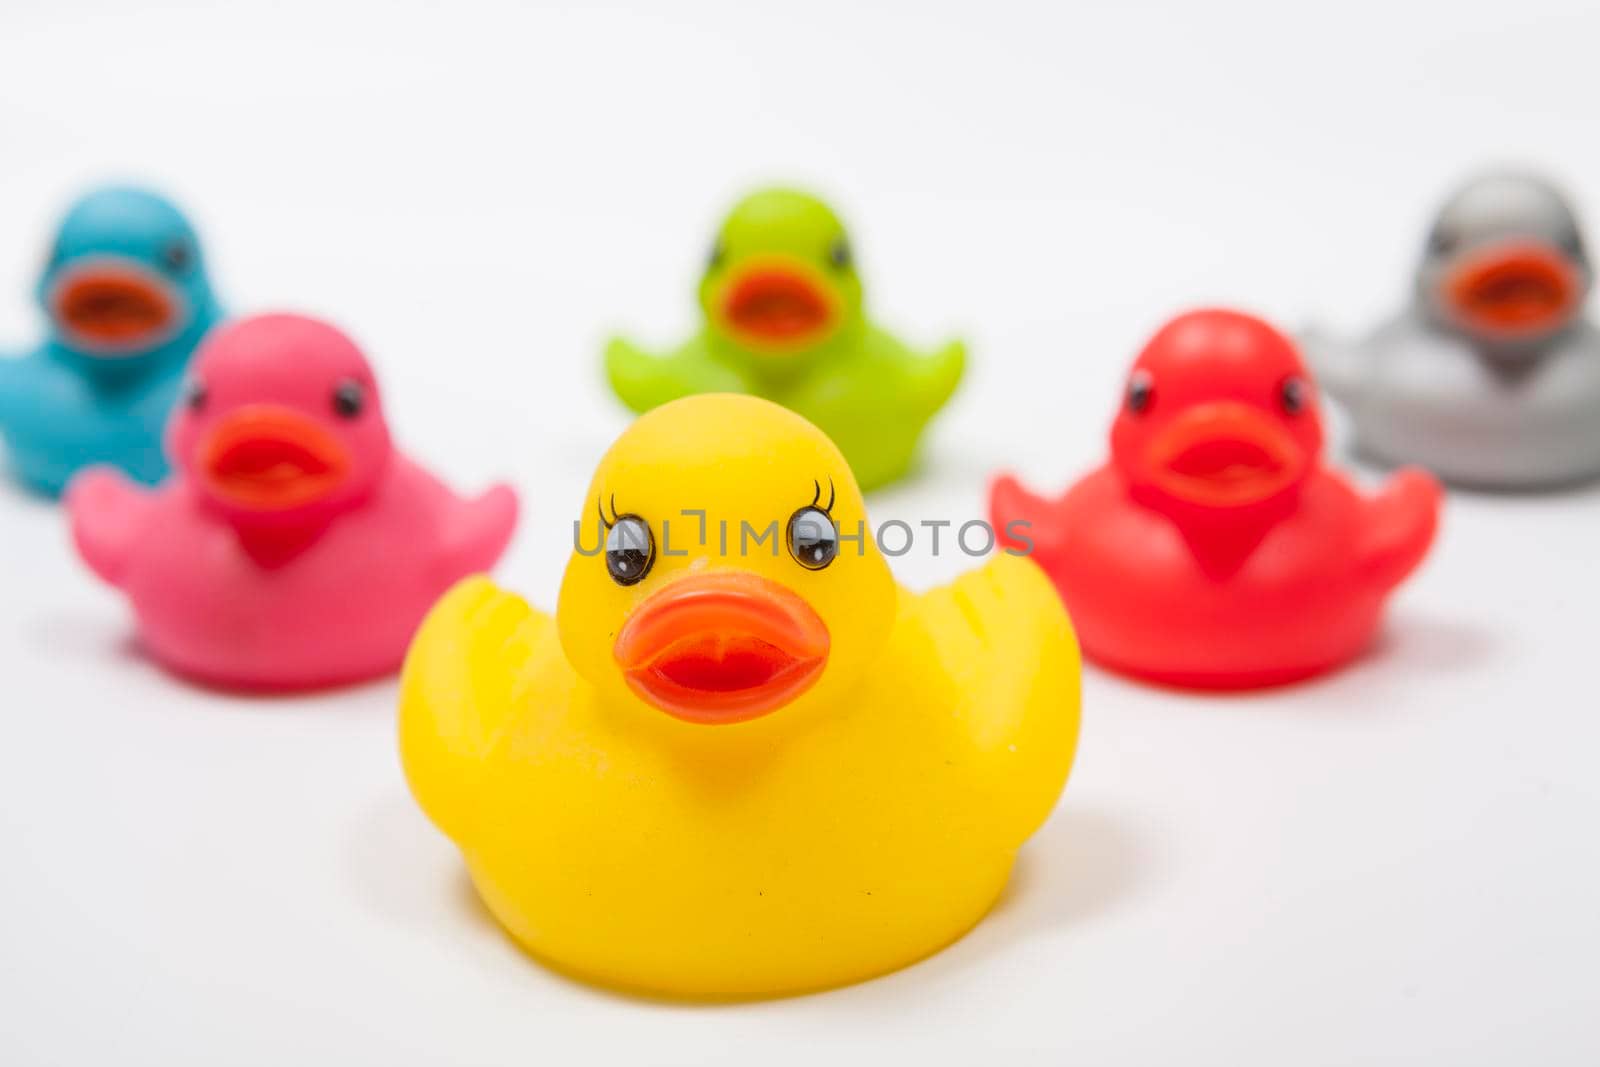 Yellow rubber duck in front of the team of colorful rubber ducks isolated, leadership, teamwork concept